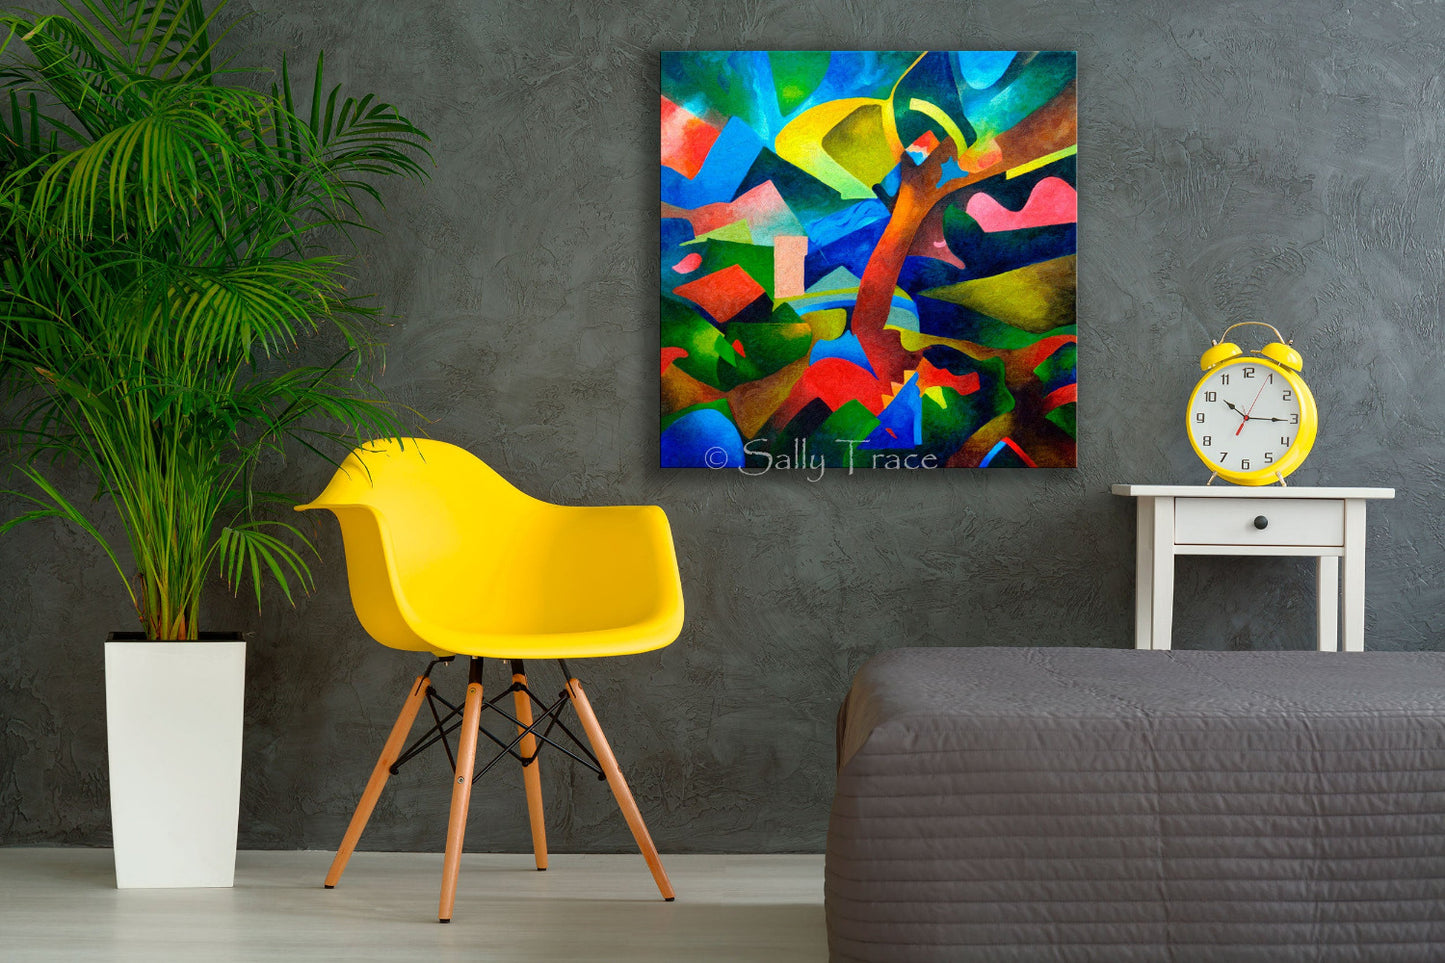 Canvas prints made from my original painting "Dark Landscape", an abstract landscape oil painting with dark blues, vibrant colors, "Dark Landscape"